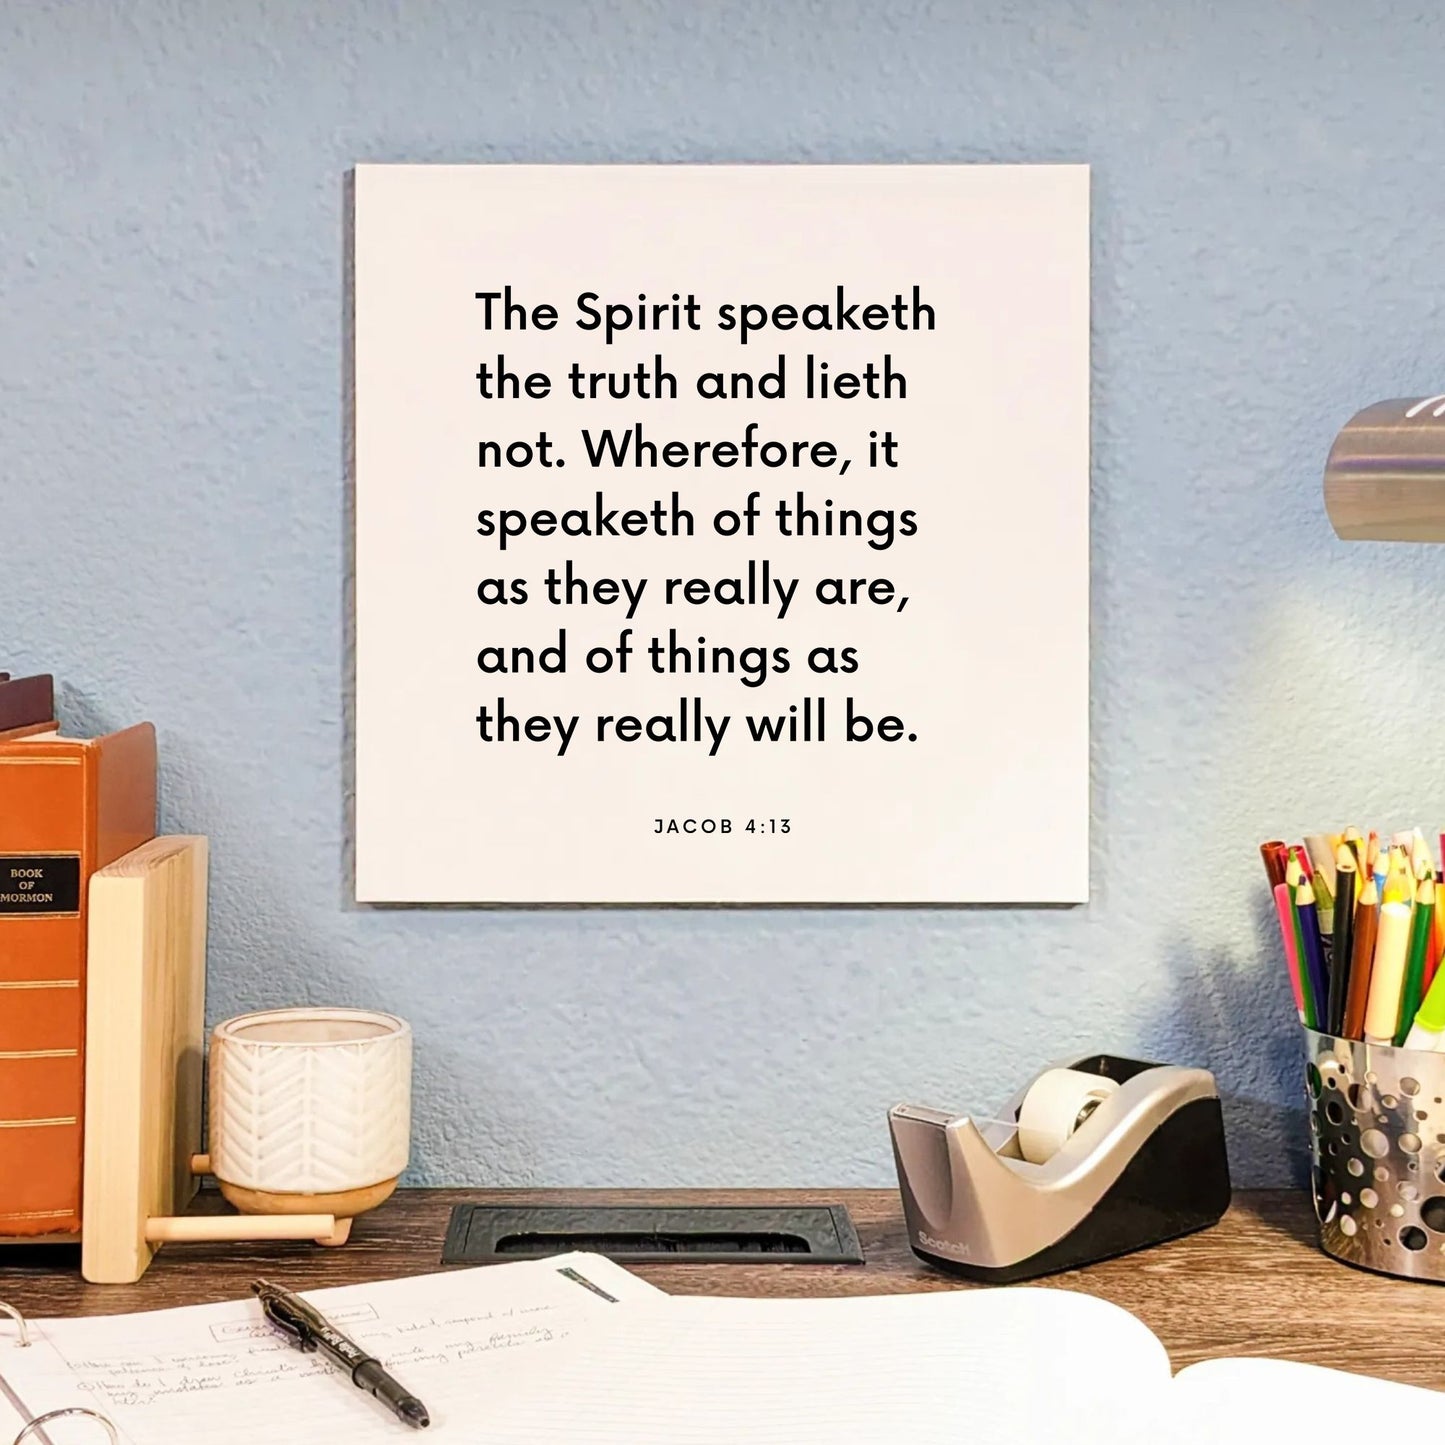 Desk mouting of the scripture tile for Jacob 4:13 - "The Spirit speaketh the truth and lieth not"